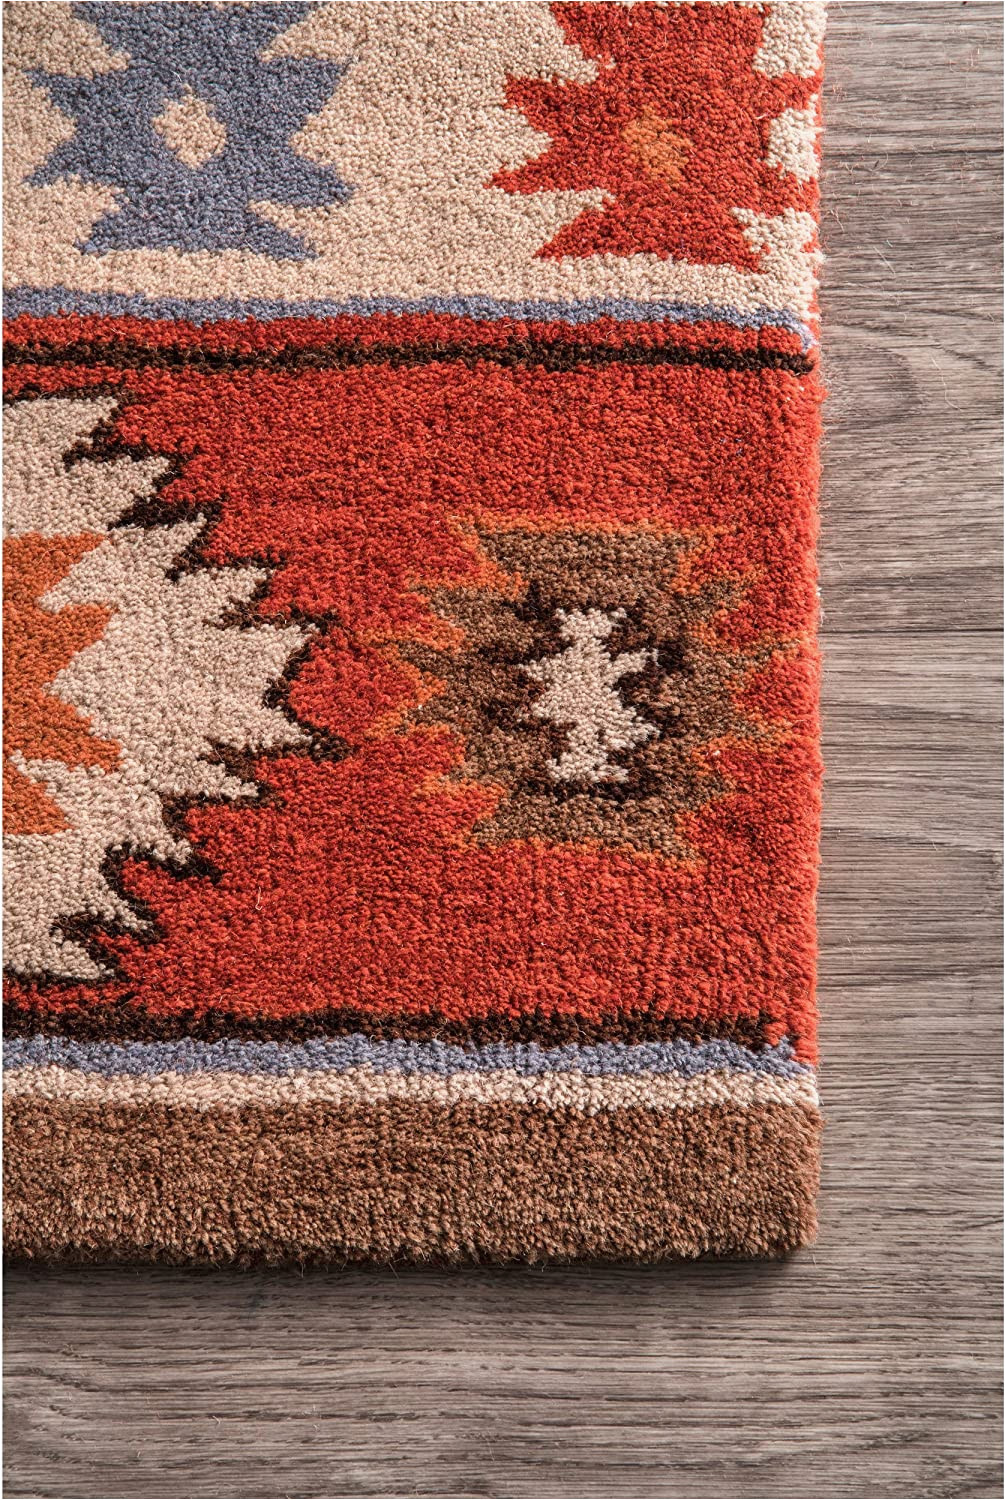 Joshua Hand Tufted Red Wine area Rug Amazon.de: Nuloom Spve04a Traditioneller Vintage-teppich Aus Wolle …